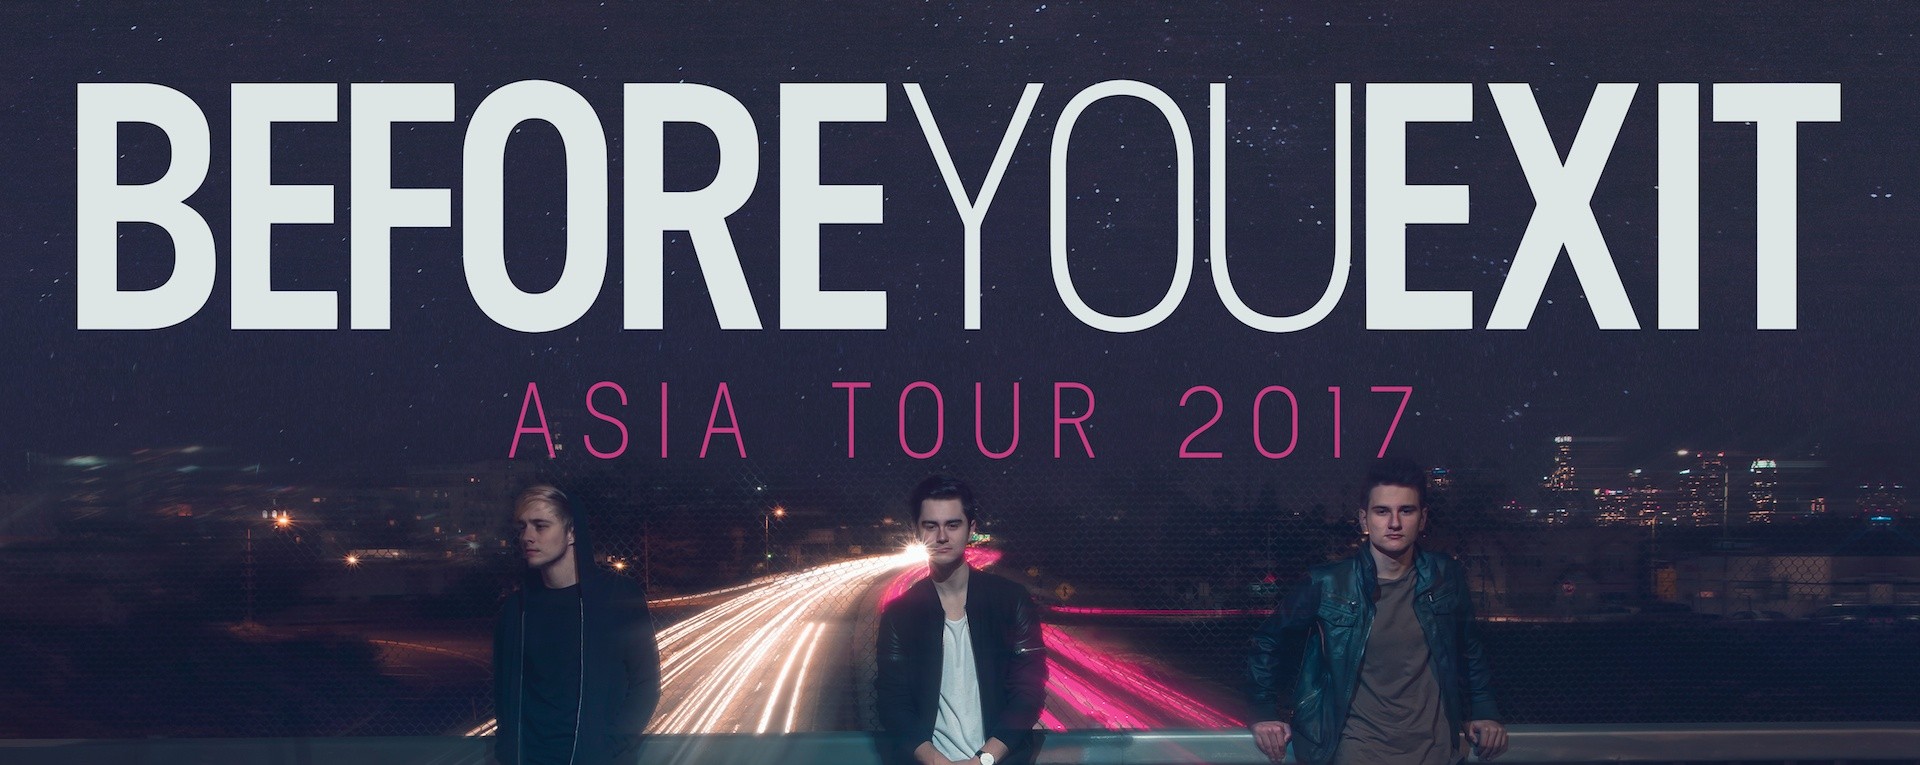 Before You Exit live in Singapore